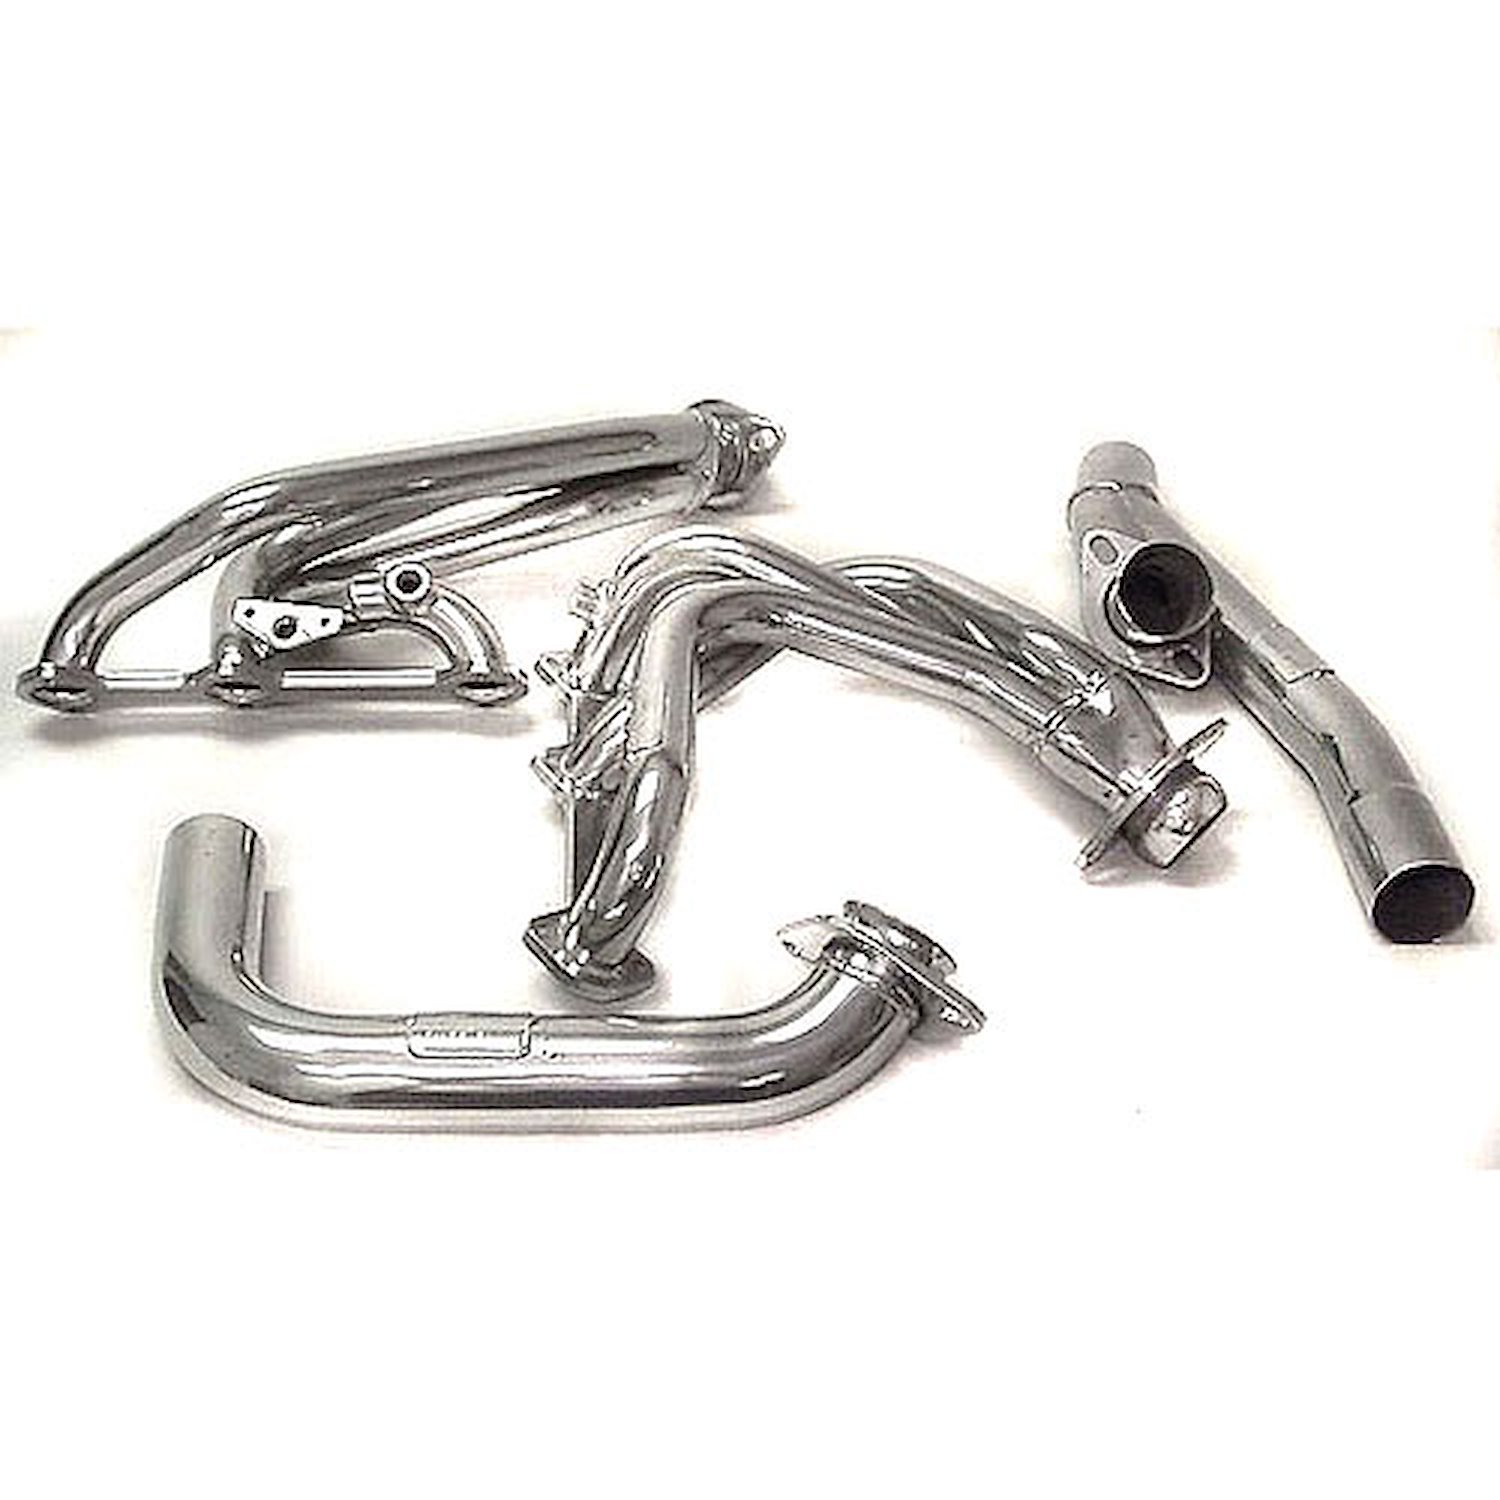 Armor Coat Headers 1993-95 Camaro & Firebird 3.4L with Air Injection